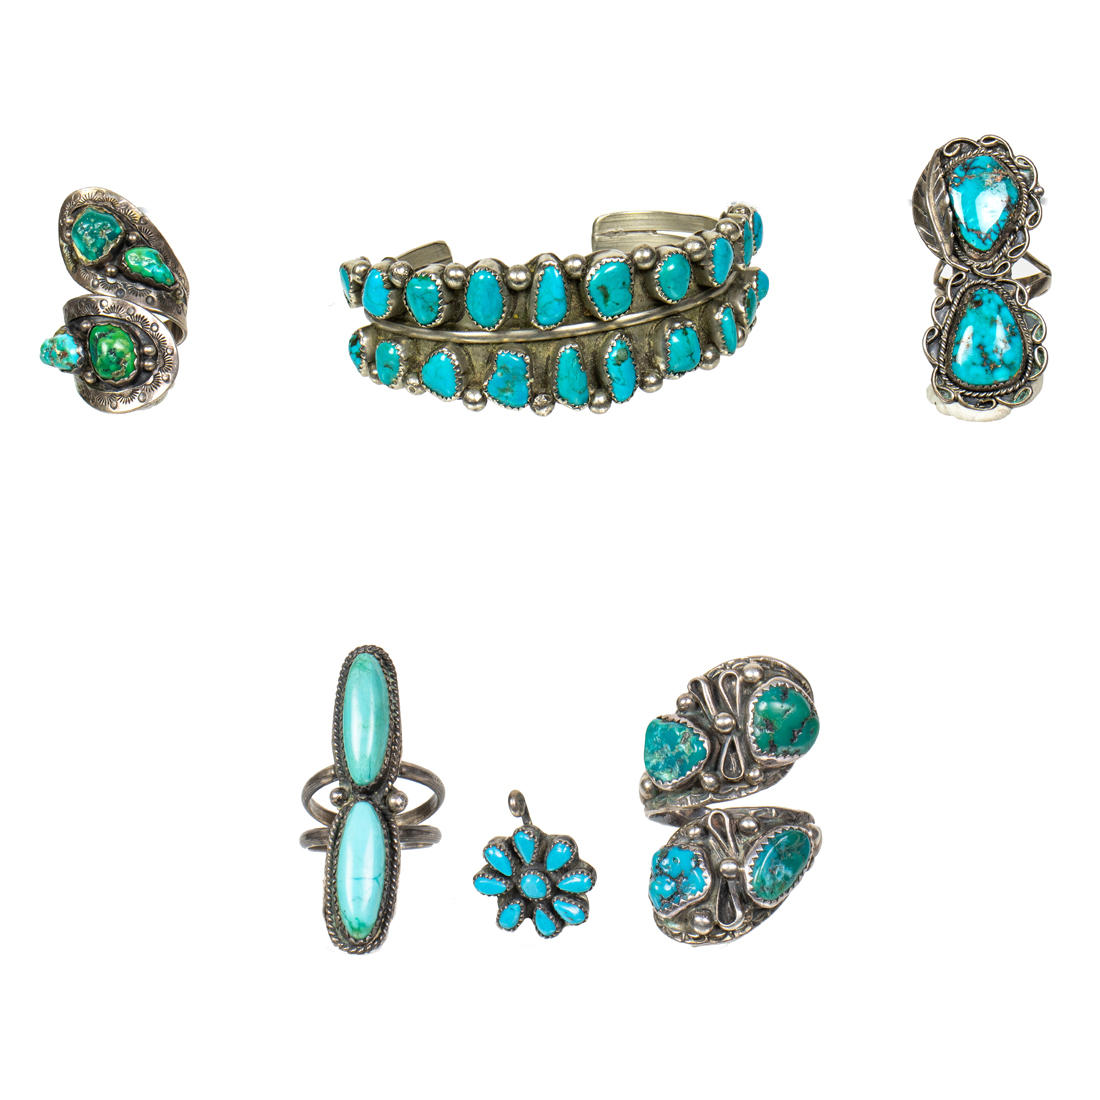 A NAVAJO TURQUOISE SILVER JEWELRY